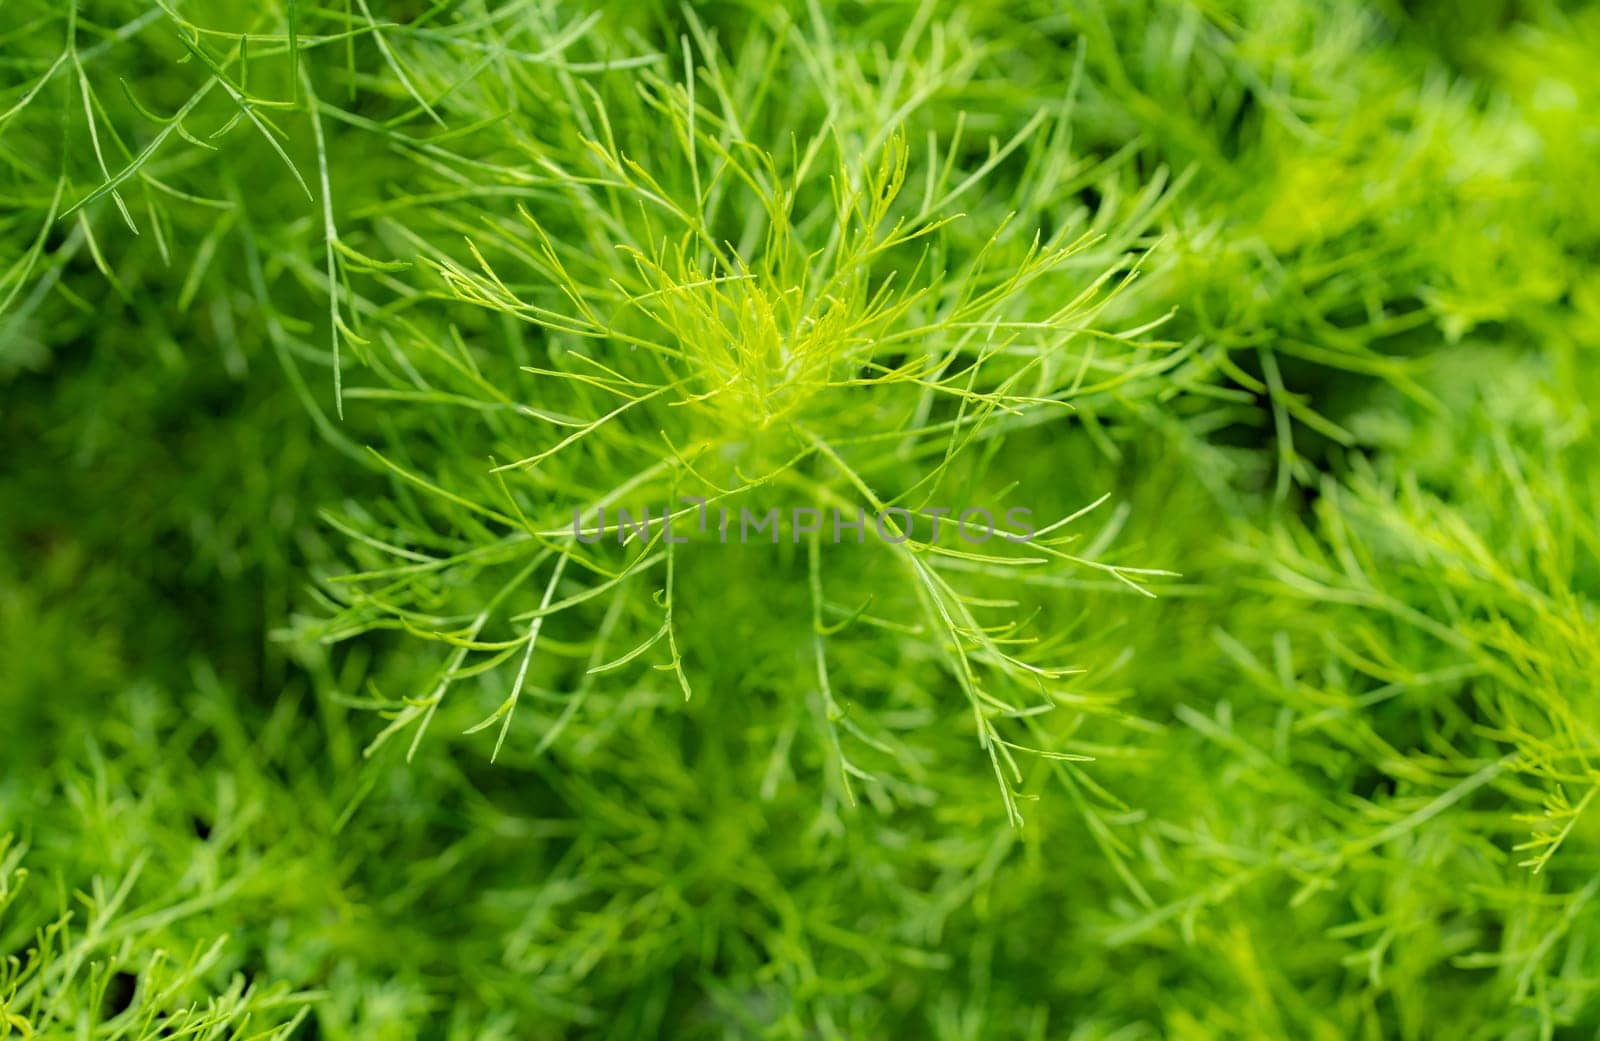 Green leaves of ornamental plant in the garden. Full frame small green leaf texture background. Dense green leaf with beauty pattern texture background. Green wallpaper. Nature abstract background.